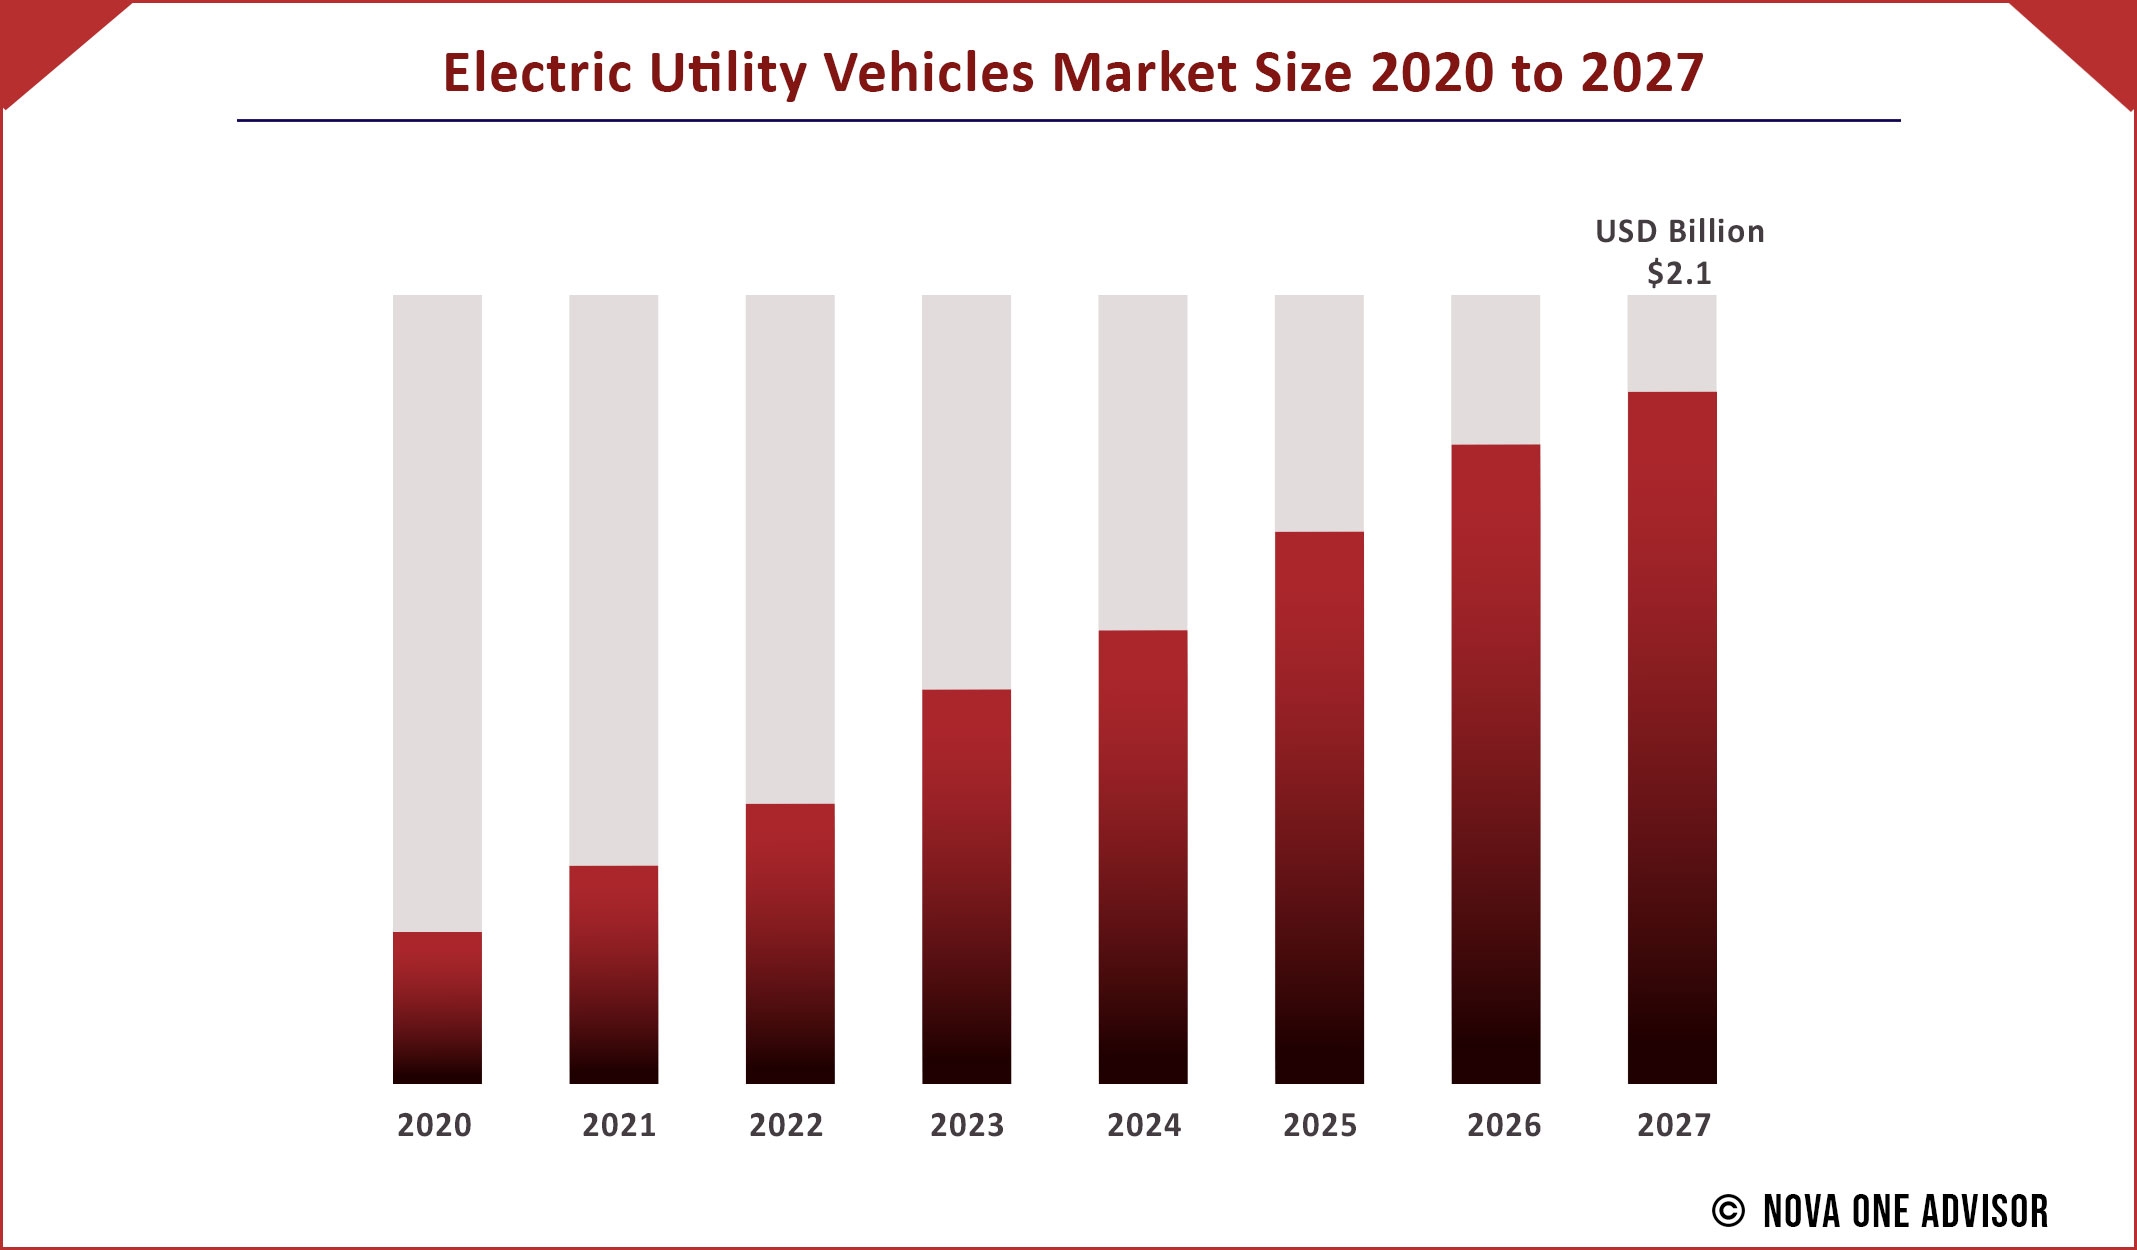 Electric Utility Vehicles Market Size 2020 to 2027